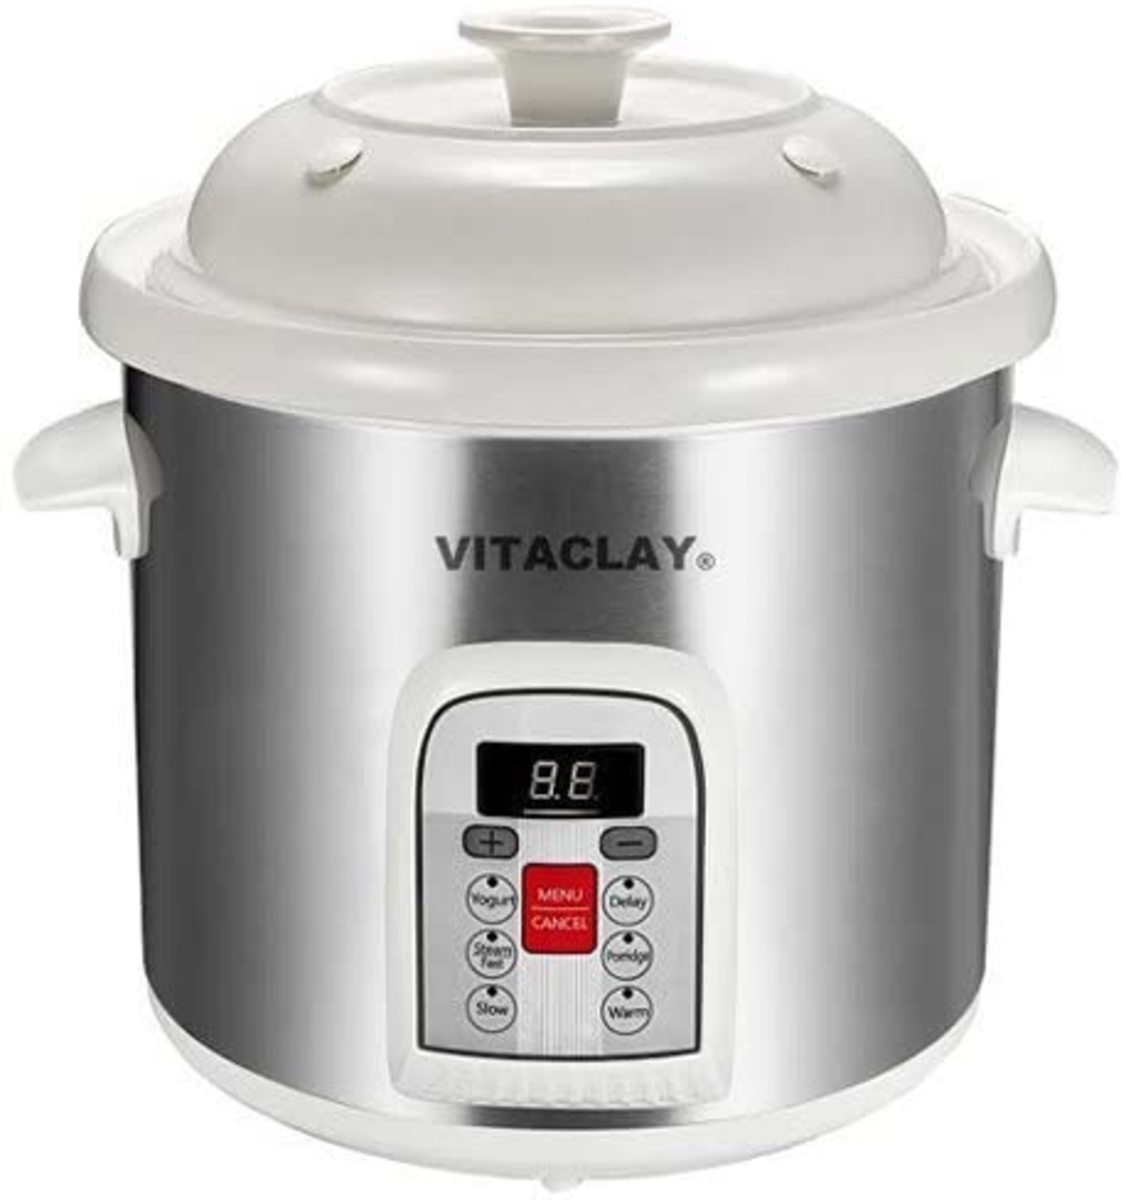 https://images.saymedia-content.com/.image/t_share/MTg1NDcyNjE3NjA2NTU0OTE1/the-best-lead-free-slow-cookers-and-crock-pots-for-the-kitchen.jpg